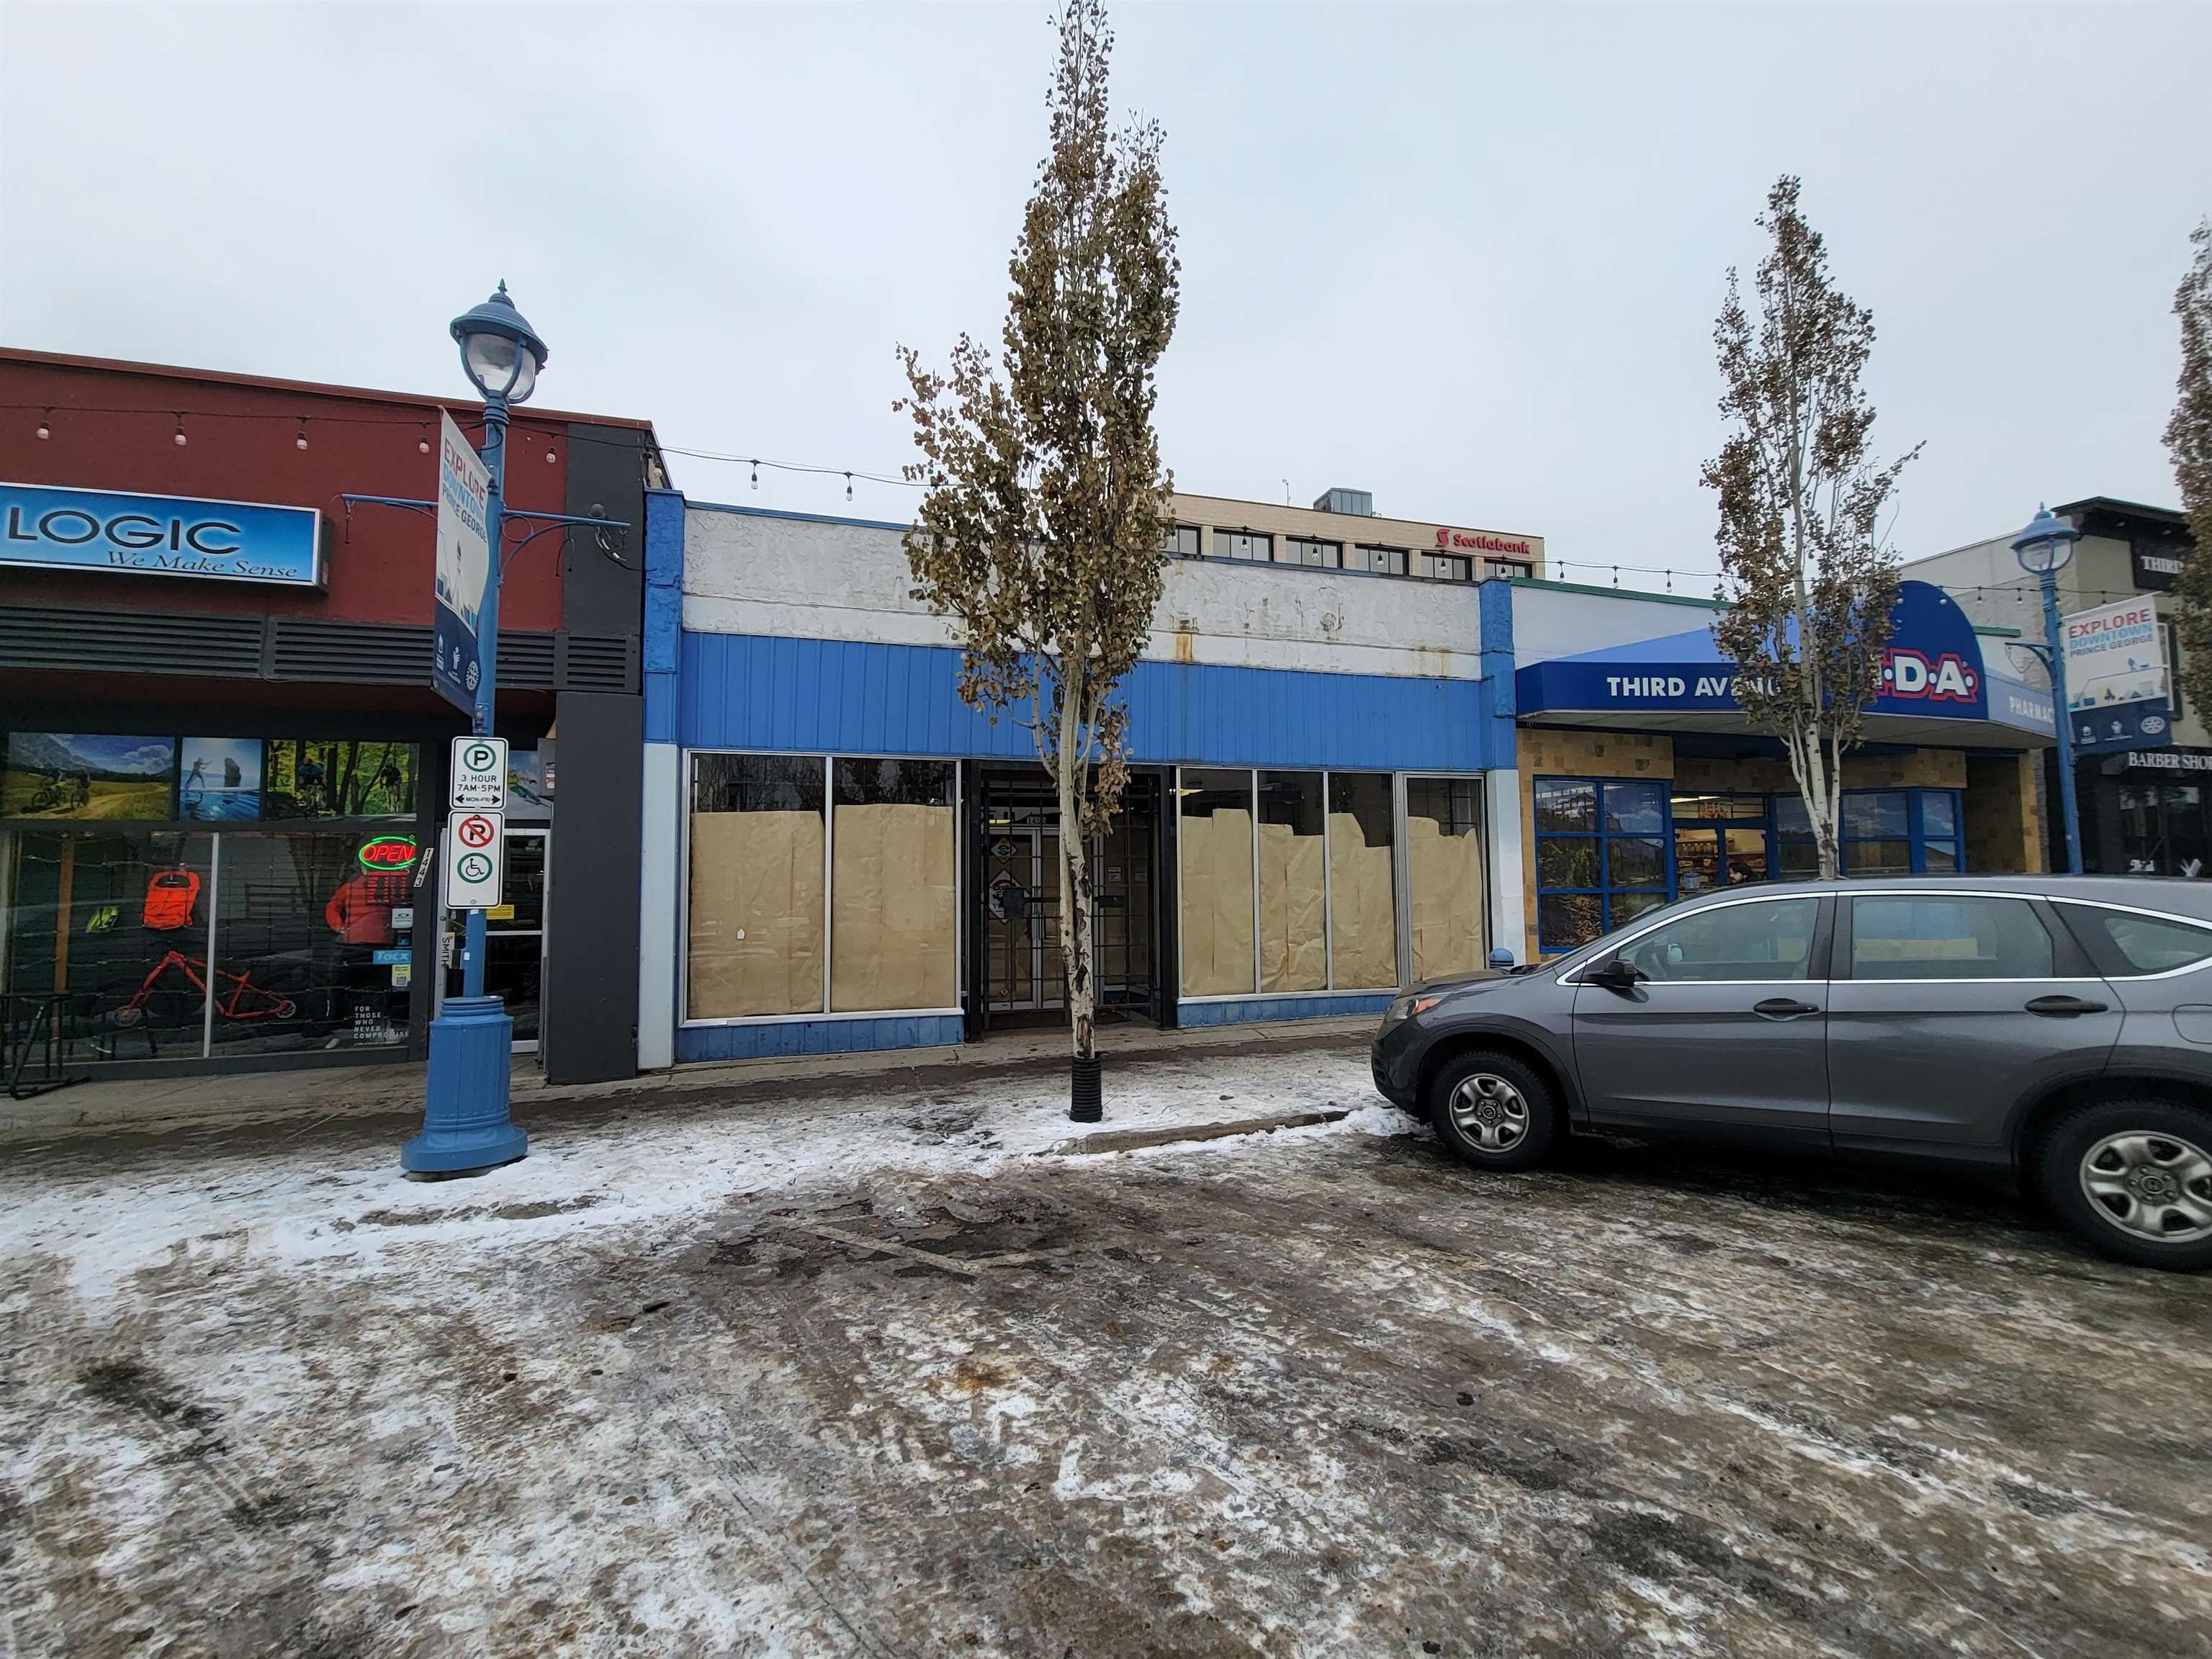 Main Photo: 1455 3RD Avenue in Prince George: Downtown PG Office for sale (PG City Central)  : MLS®# C8047880